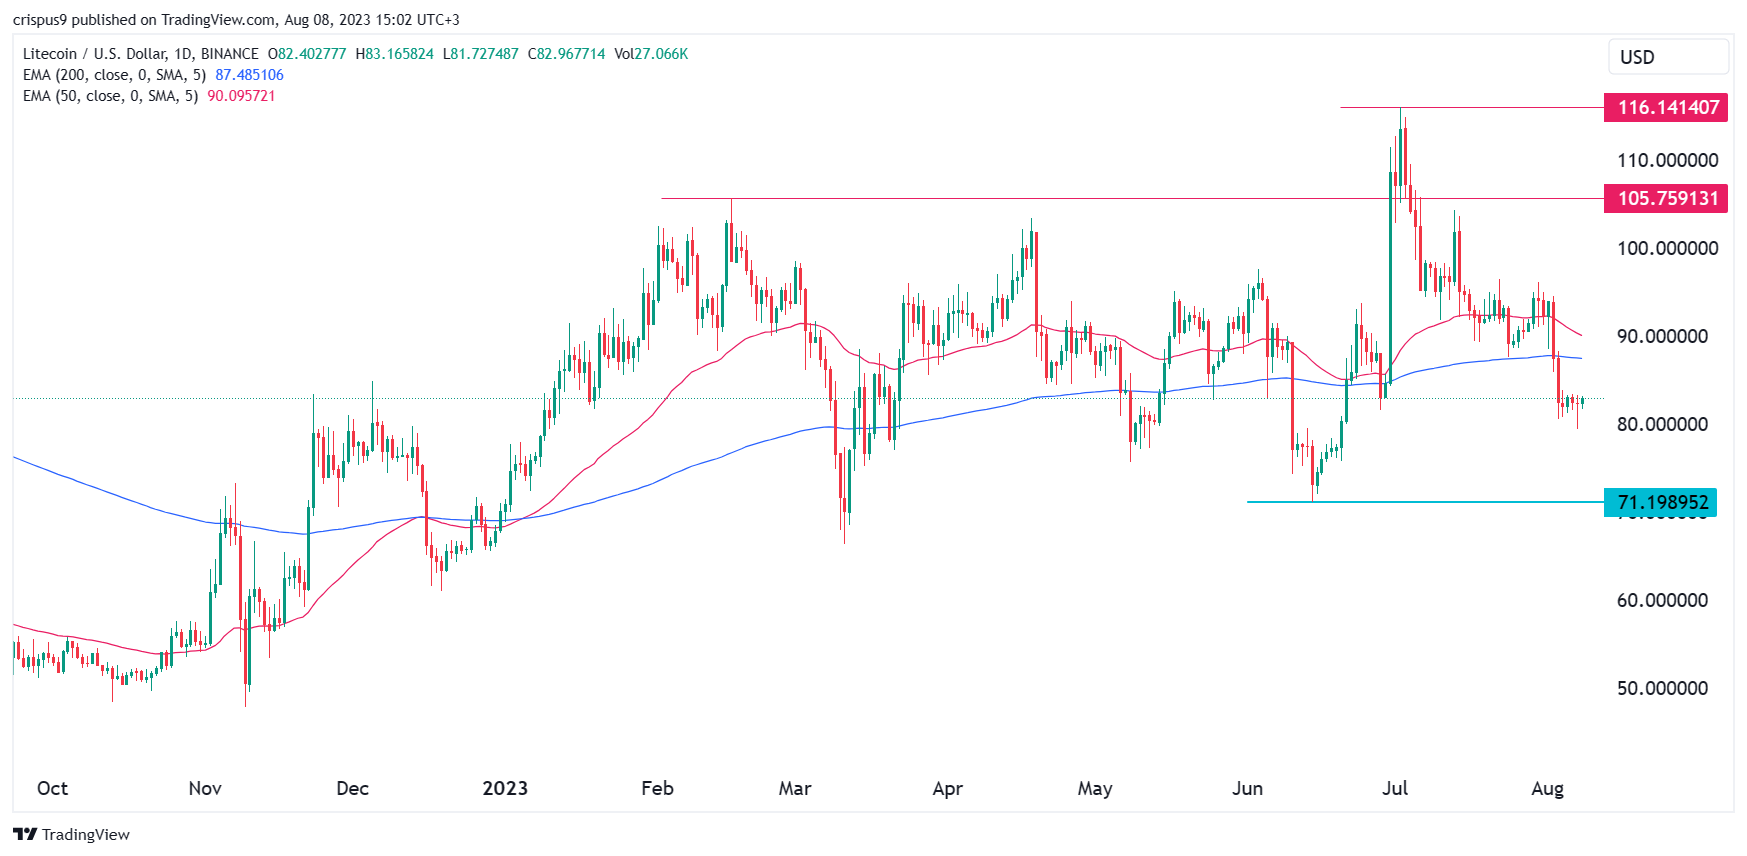 Litecoin price forecast: Brace for more weakness